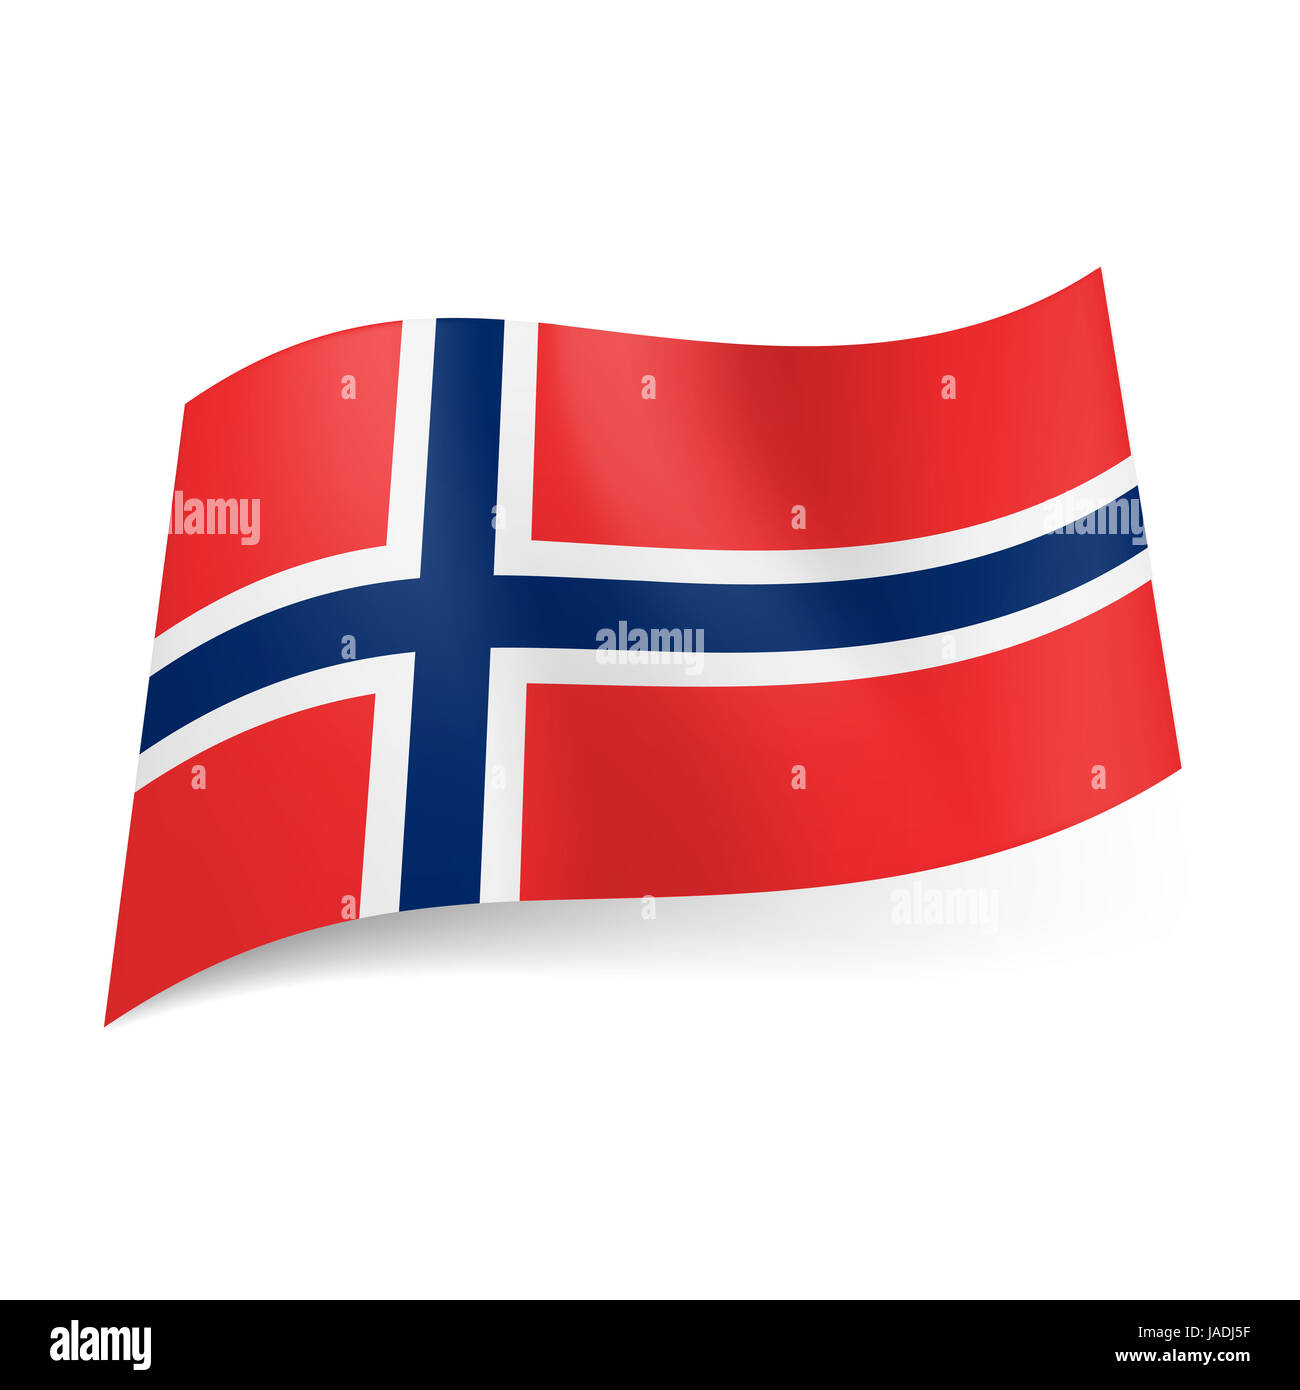 National flag Norway: white bordered Scandinavian cross on red background Stock Photo Alamy